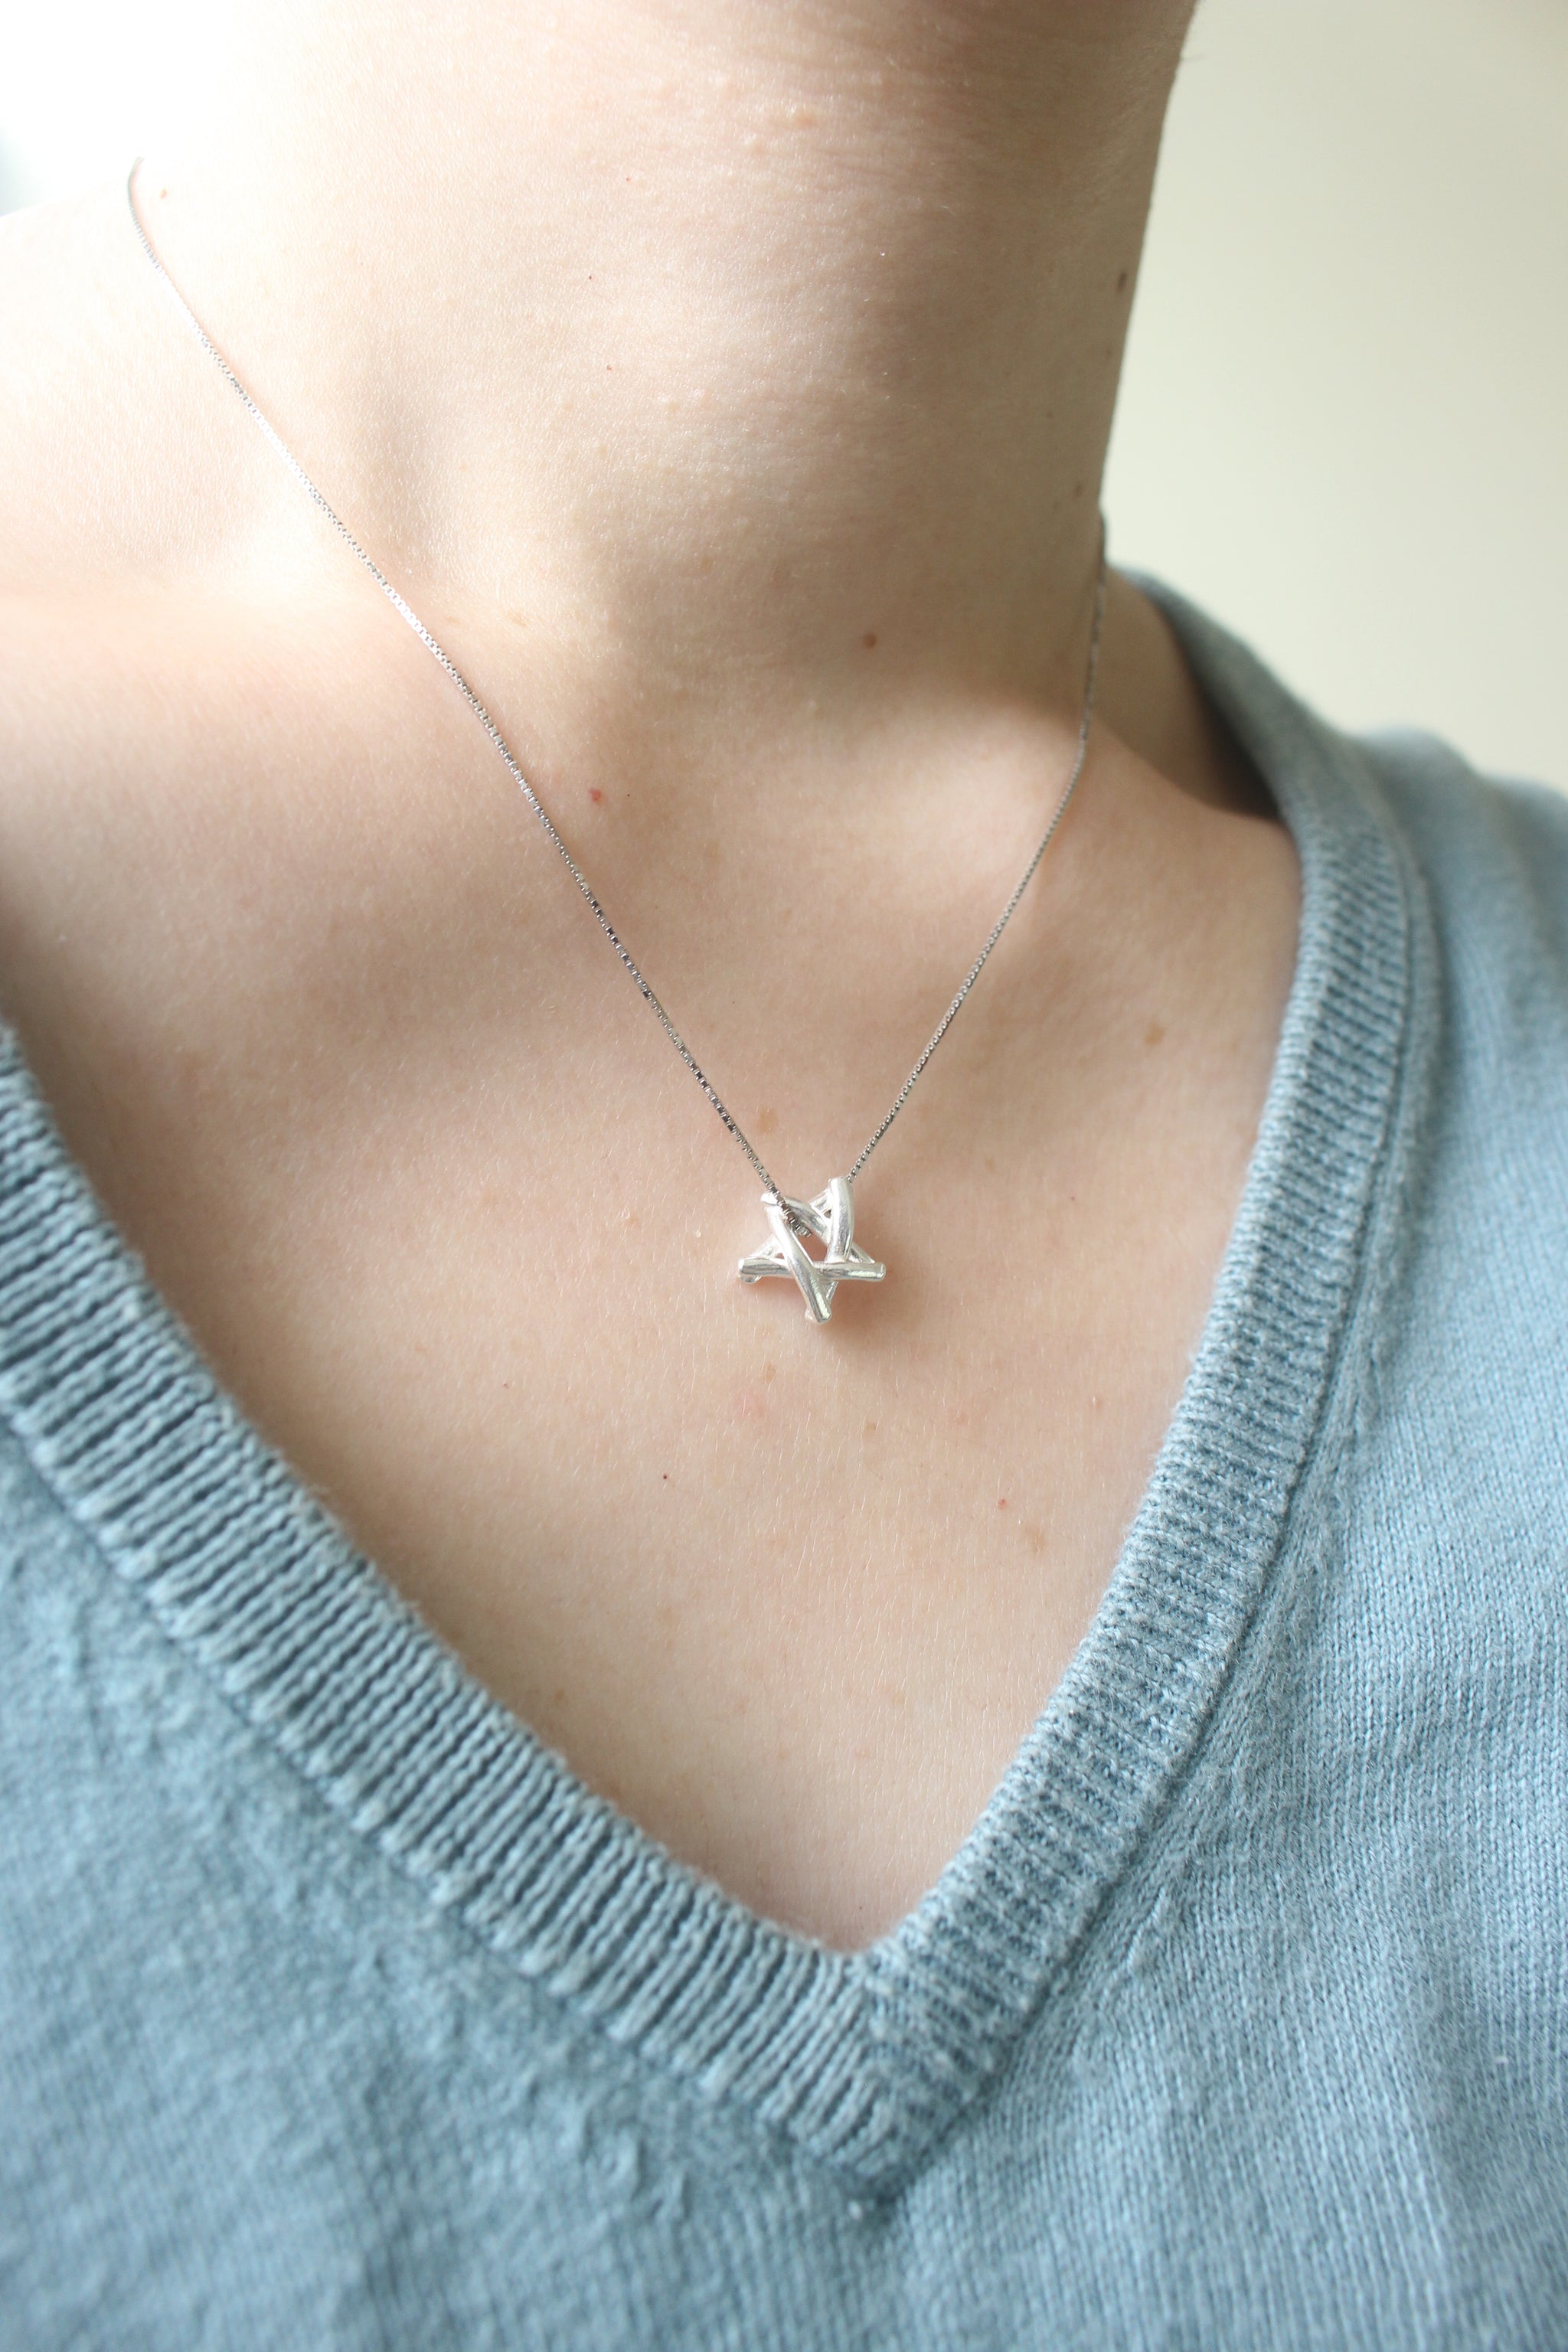 Small Matchstick Star Necklace in Sterling Silver / Toothpick Star Silver Necklace / Silver Star Necklace / Christmas Star Necklace